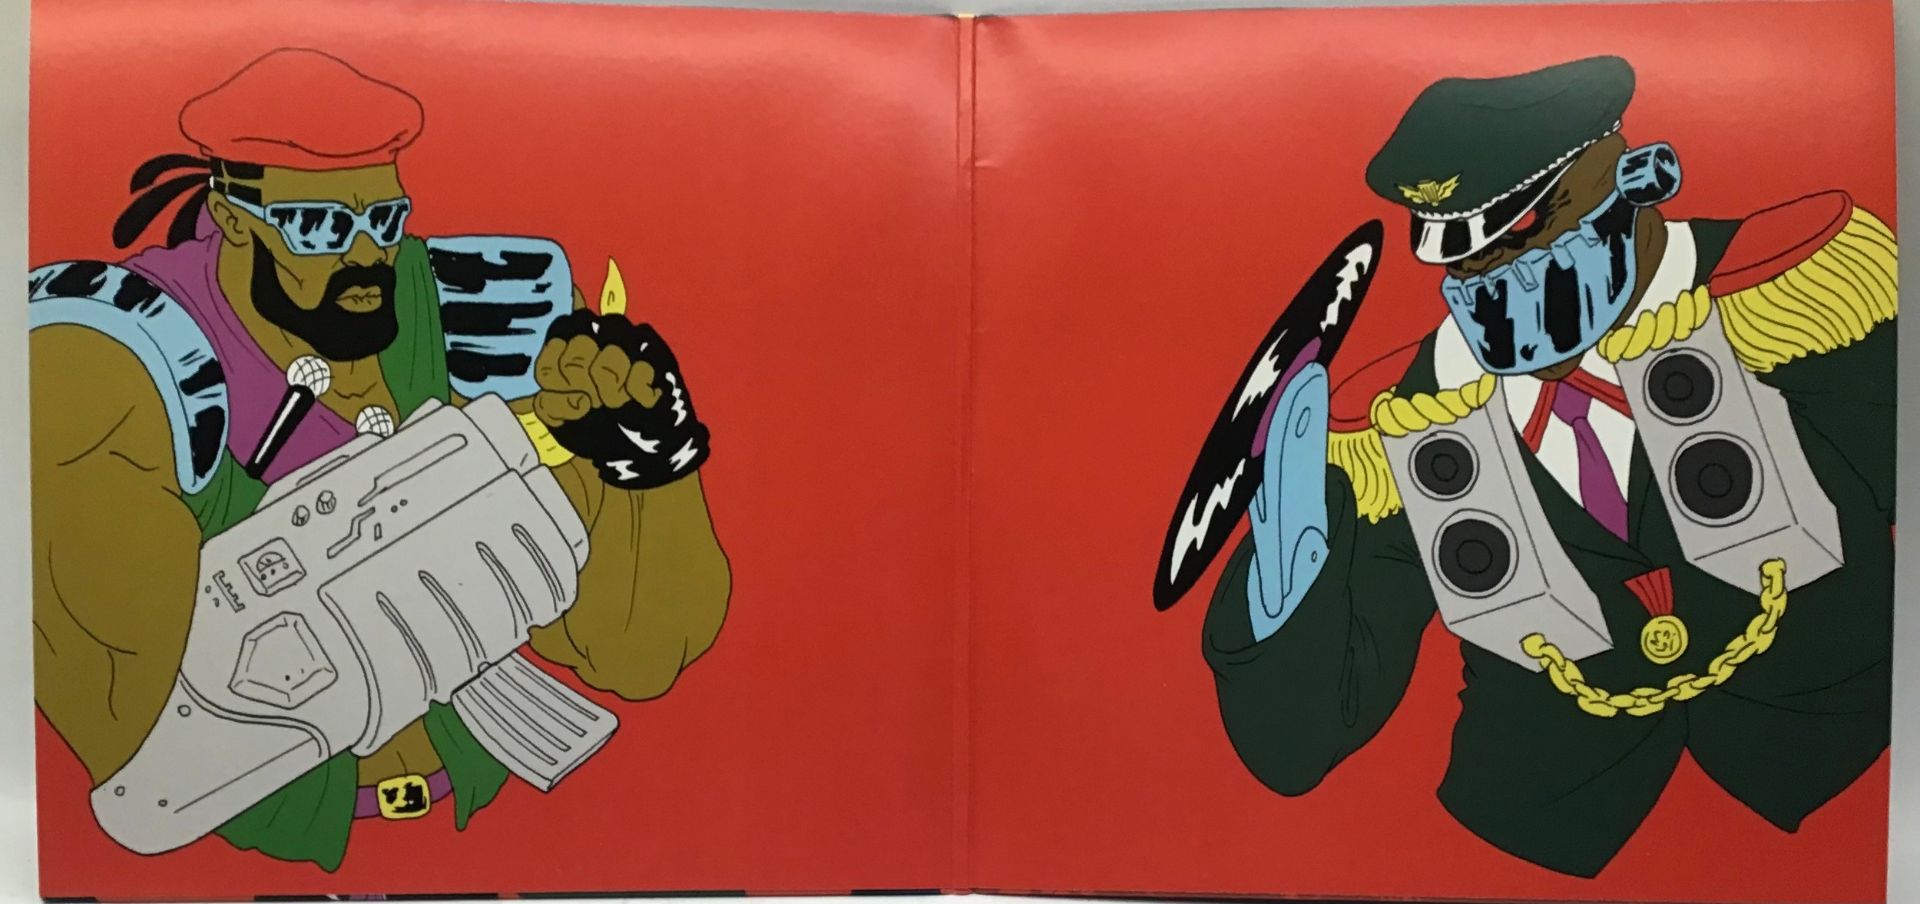 MAJOR LAZER 'FREE THE UNIVERSE' RARE DOUBLE VINYL LP. Includes Free CD of the entire album. This - Image 3 of 3